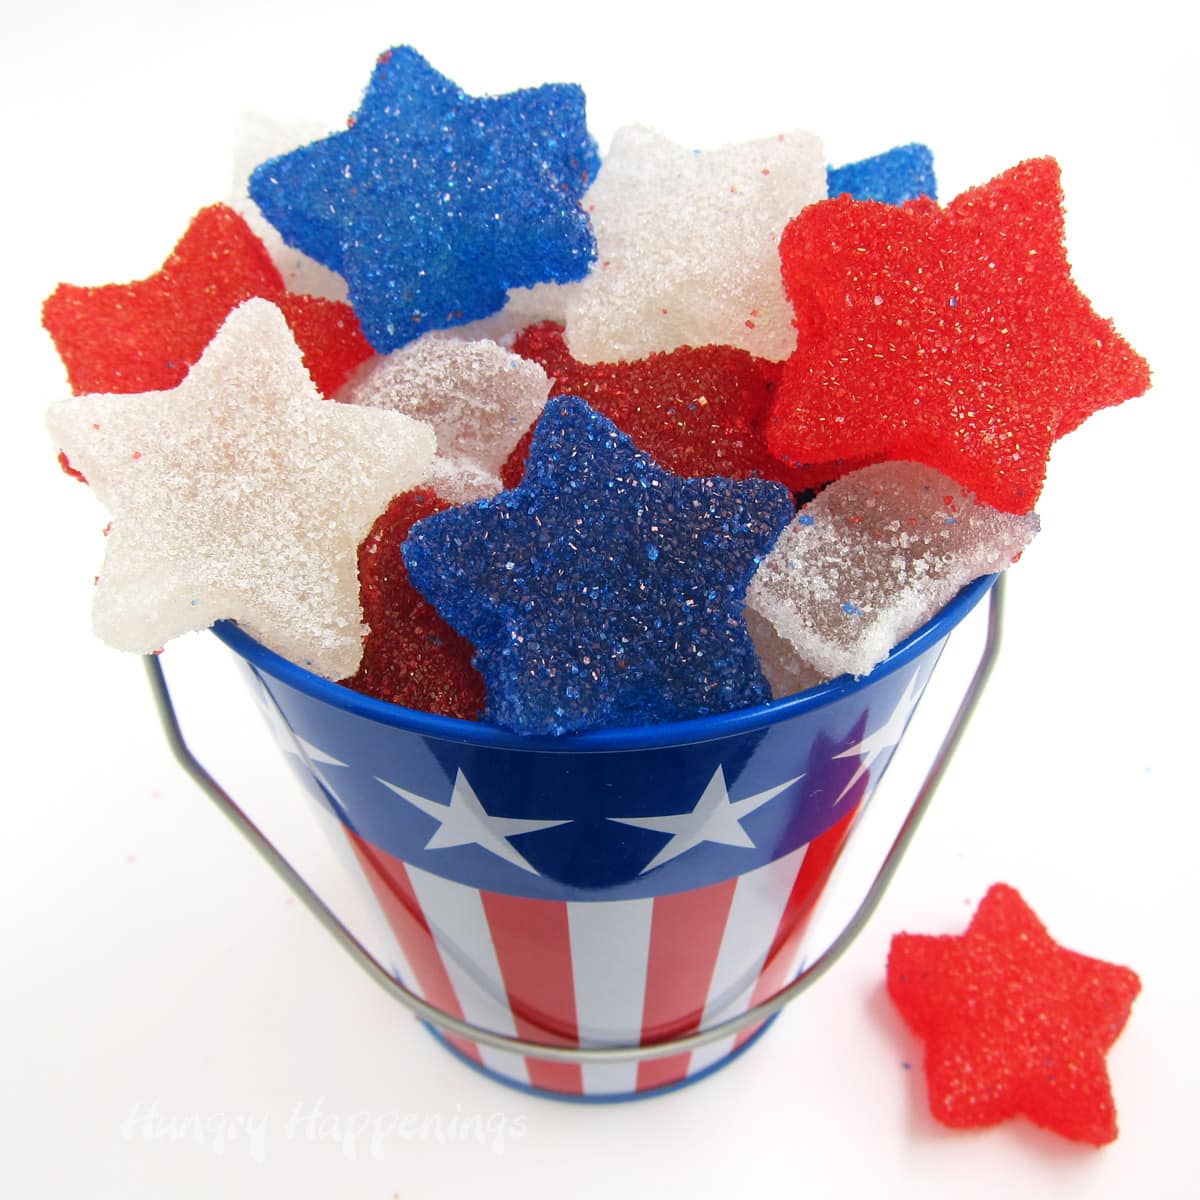 homemade gumdrops red, white, and blue stars in a metal pail with stars and stripes.